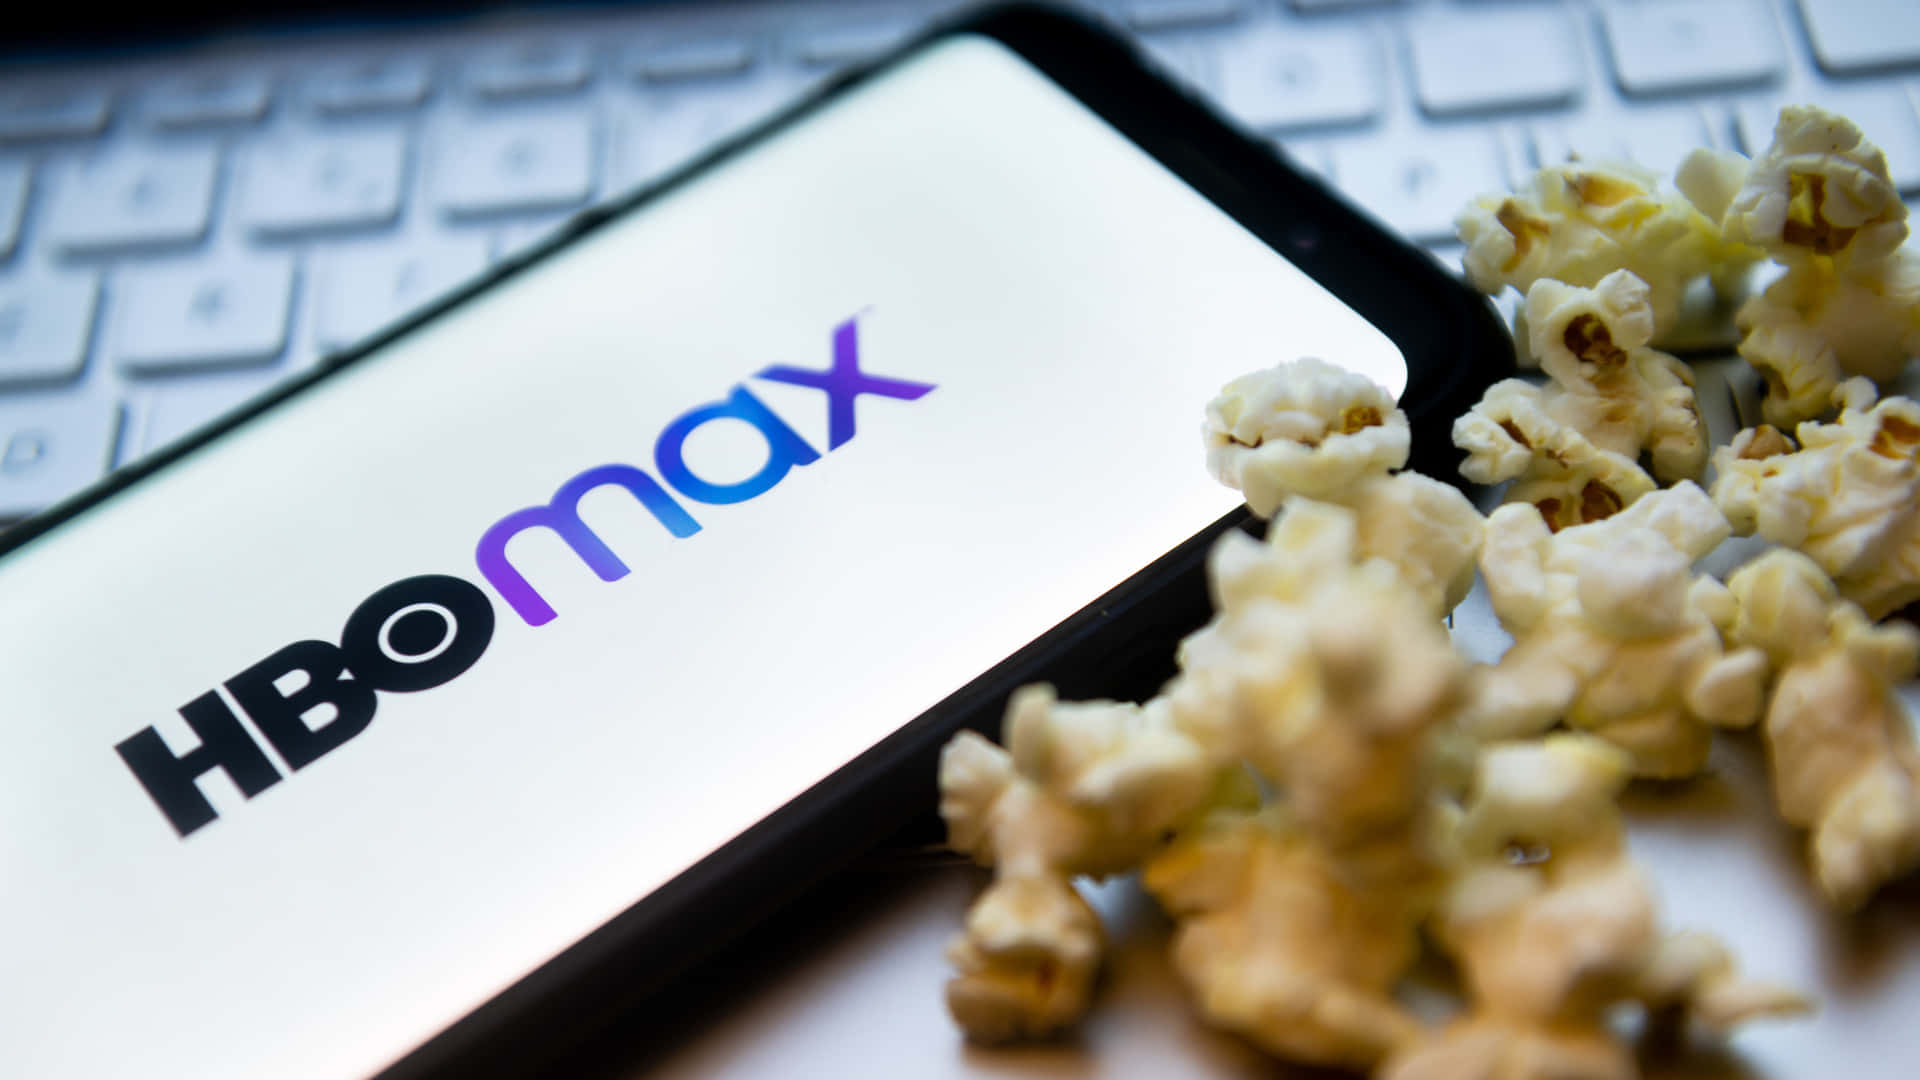 Hbo Max Logo On A Laptop With Popcorn